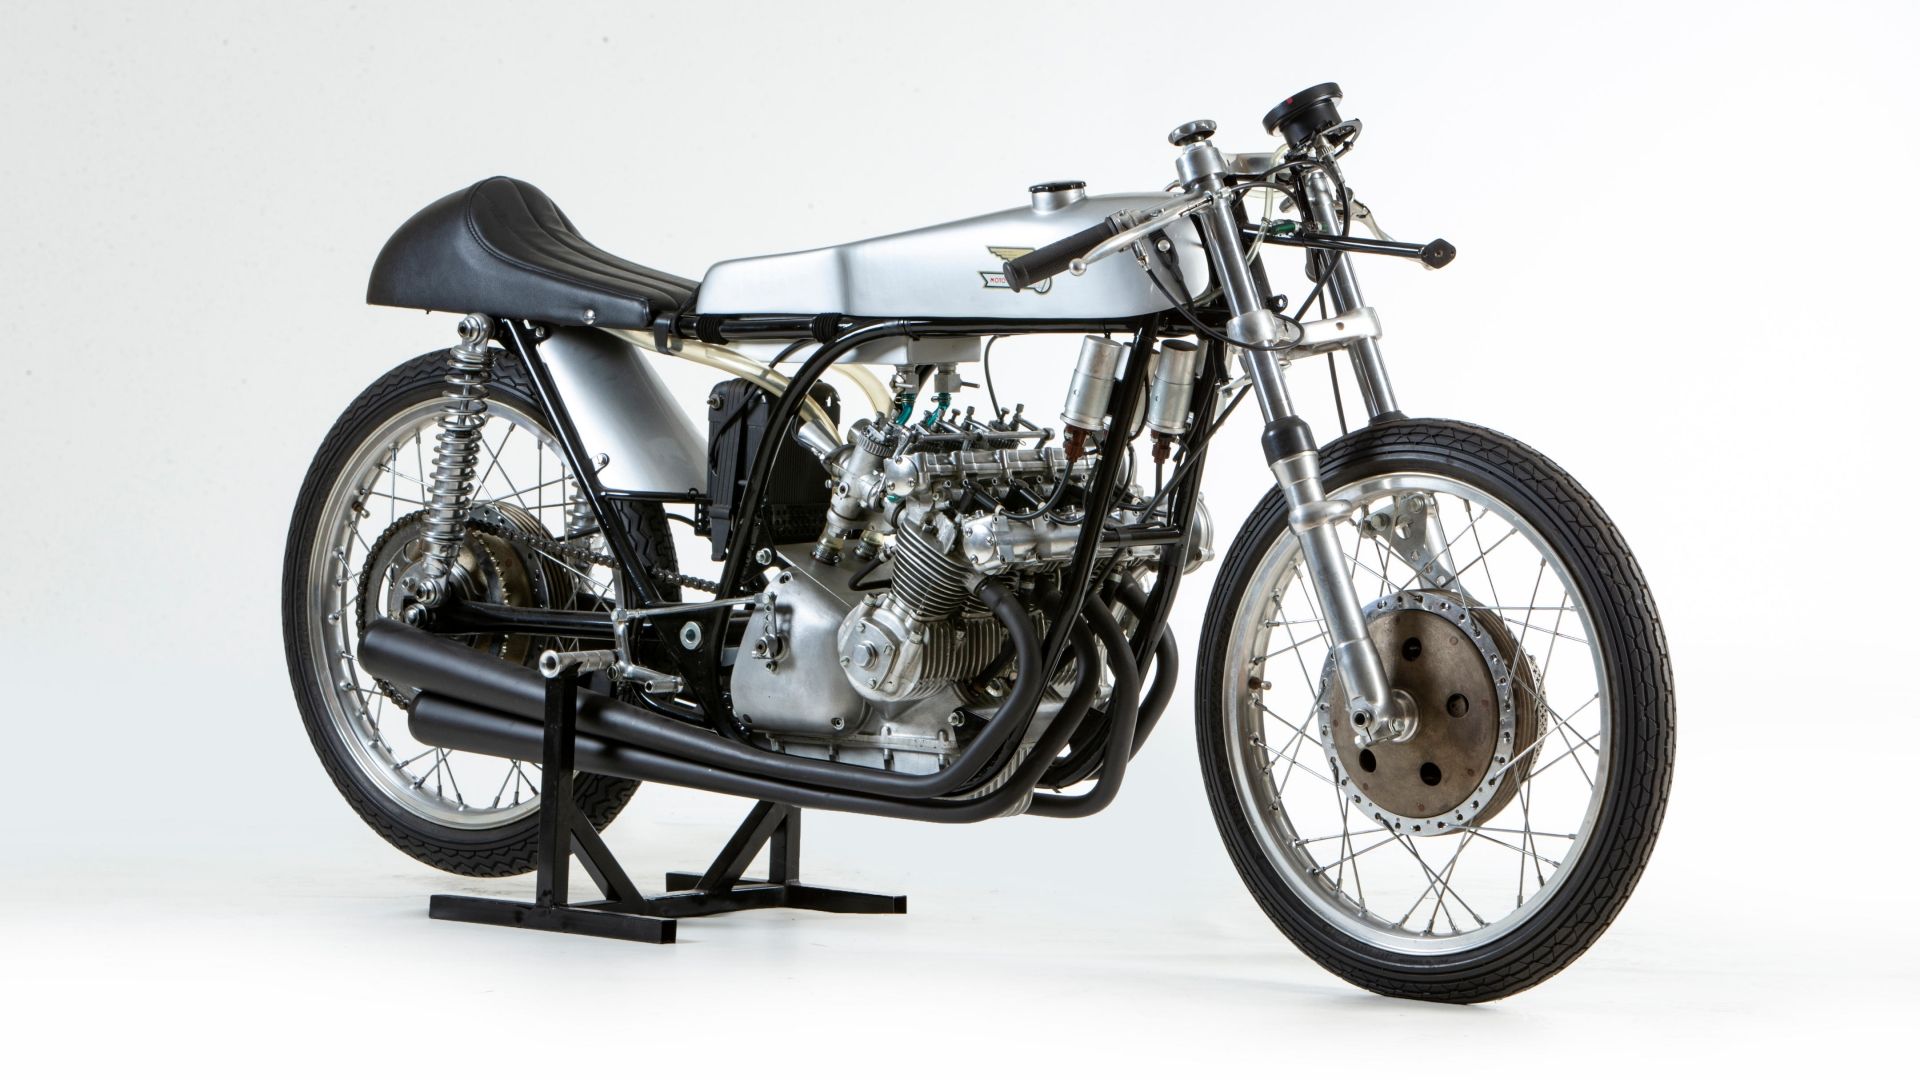 1965 Ducati 125cc Four-cylinder Grand Prix Racing Motorcycle